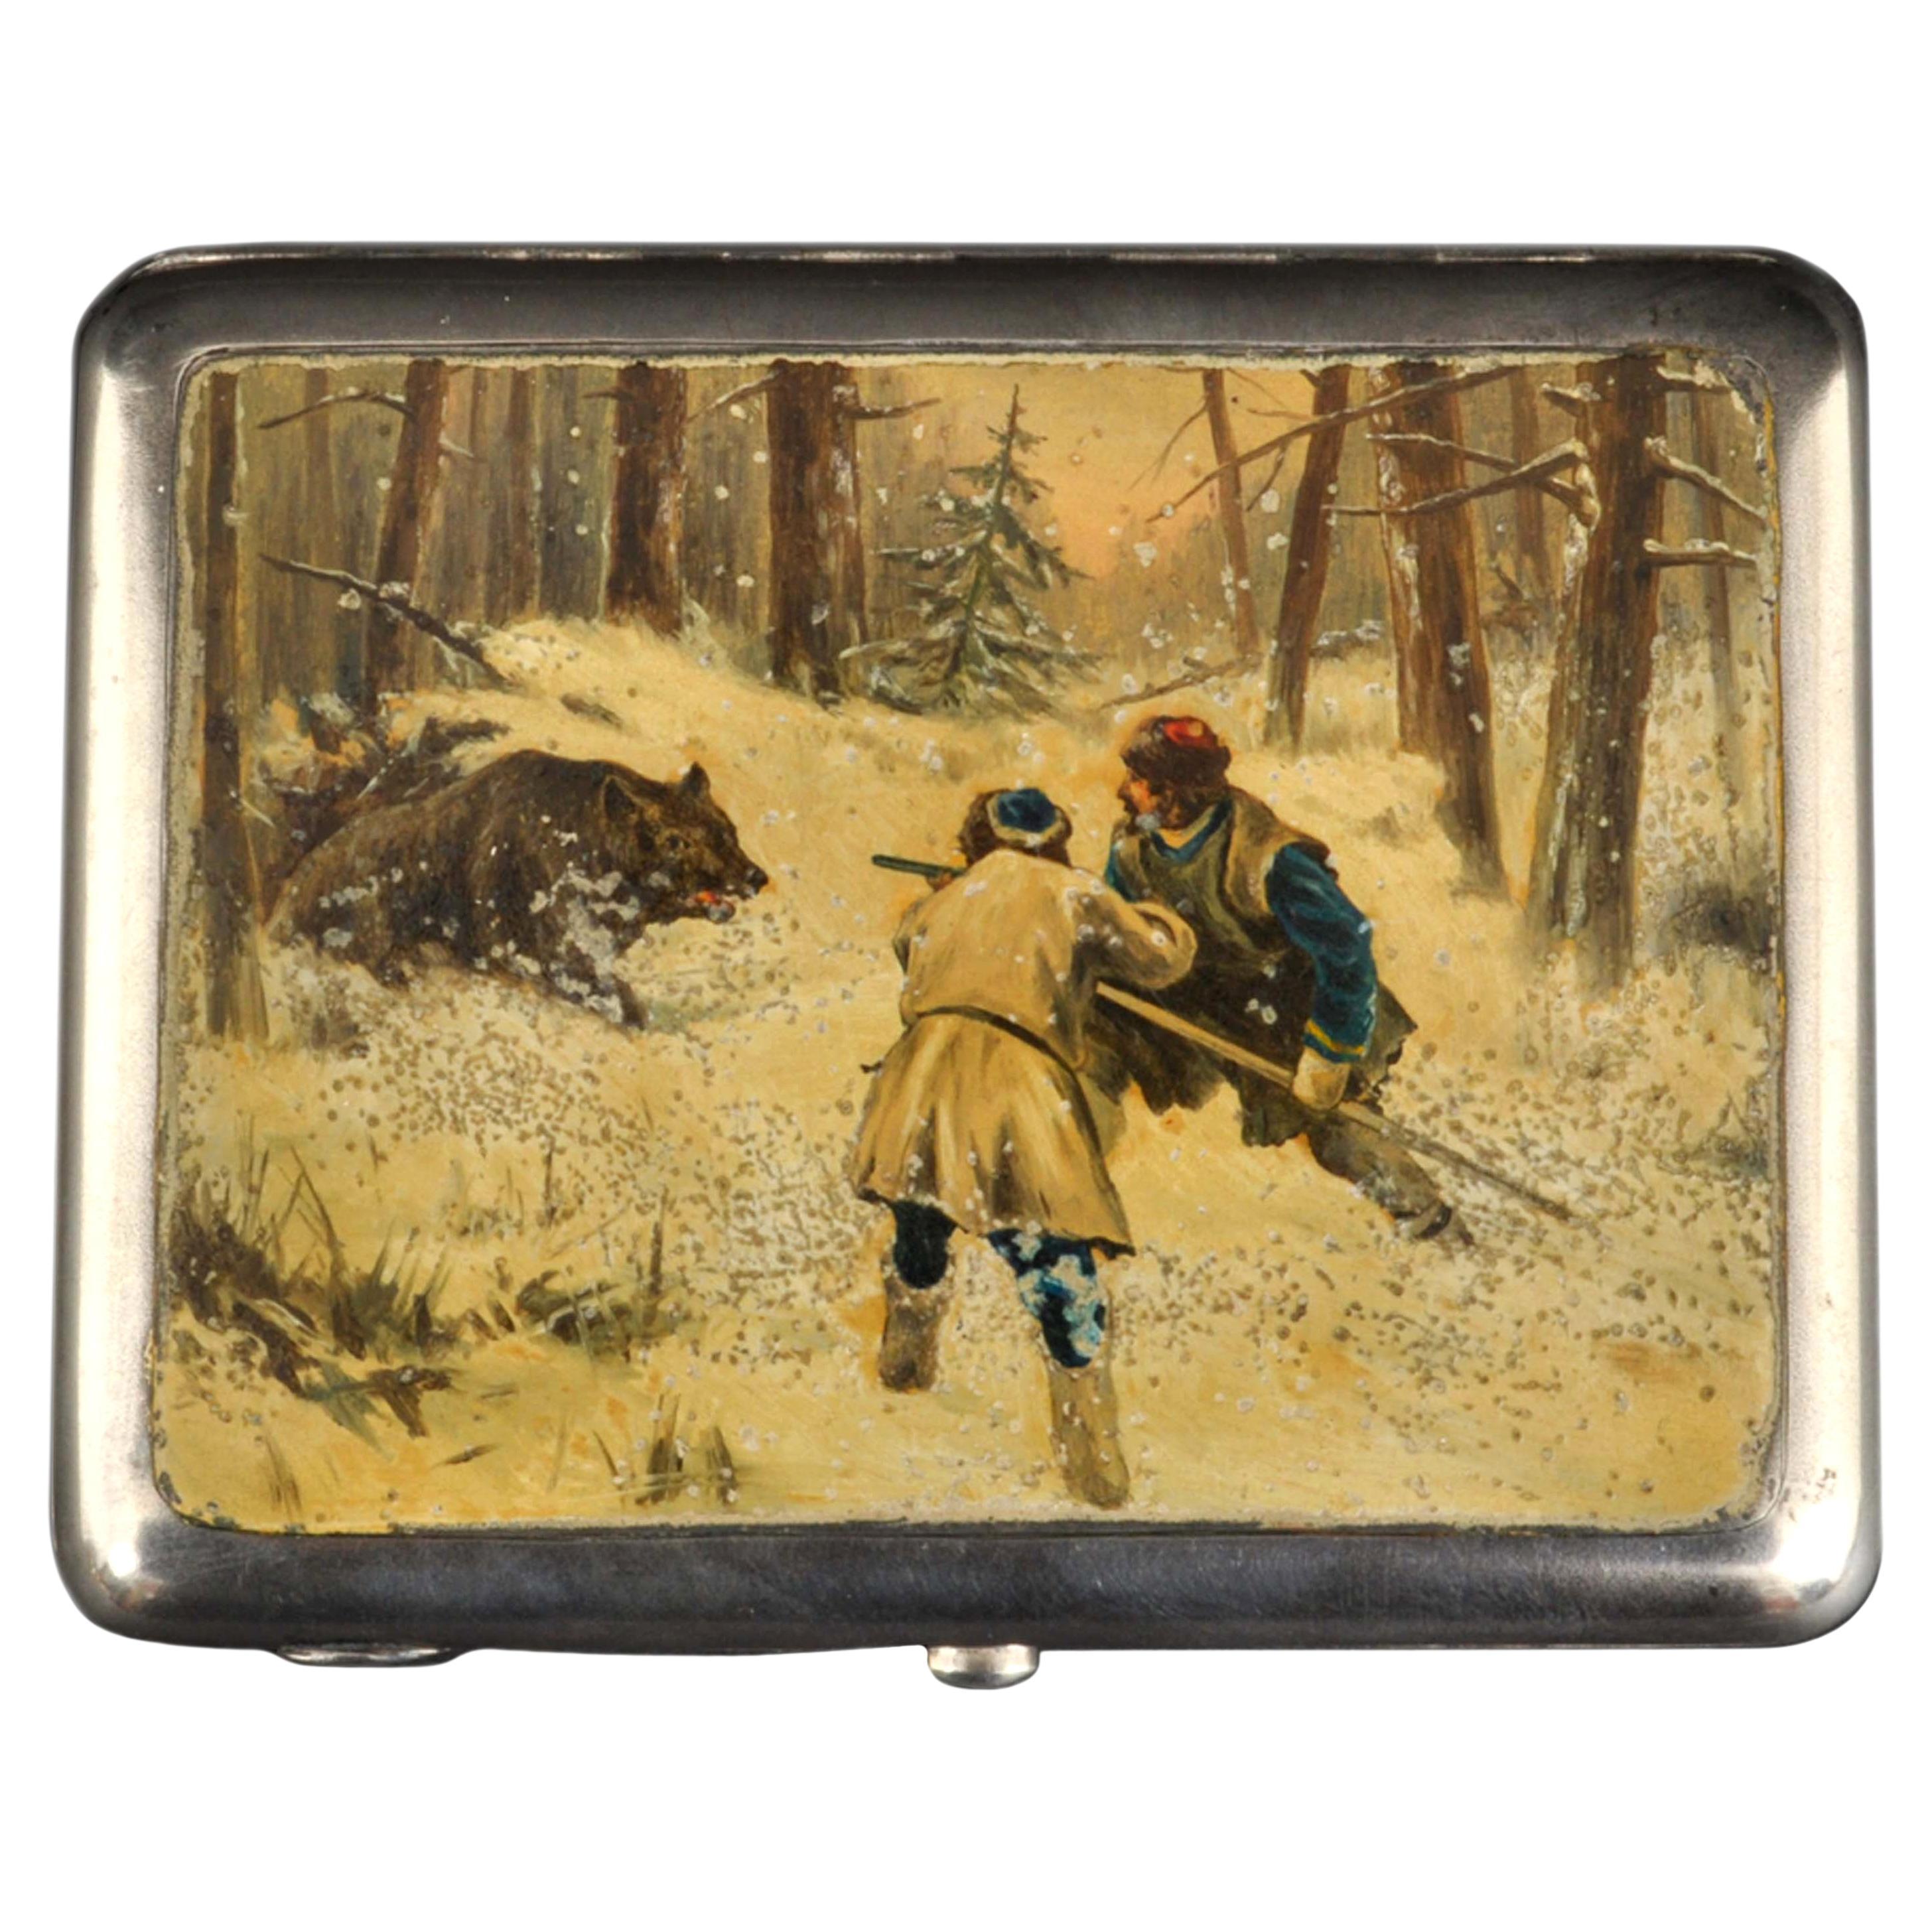 Antique Russian Imperial silver & enamel cigarette case, 1898-1914.
A rare & unusual antique Russian silver case with an enameled pictorial hunting scene to the front, depicting two Russian men in a snowy forested landscape hunting a bear. The